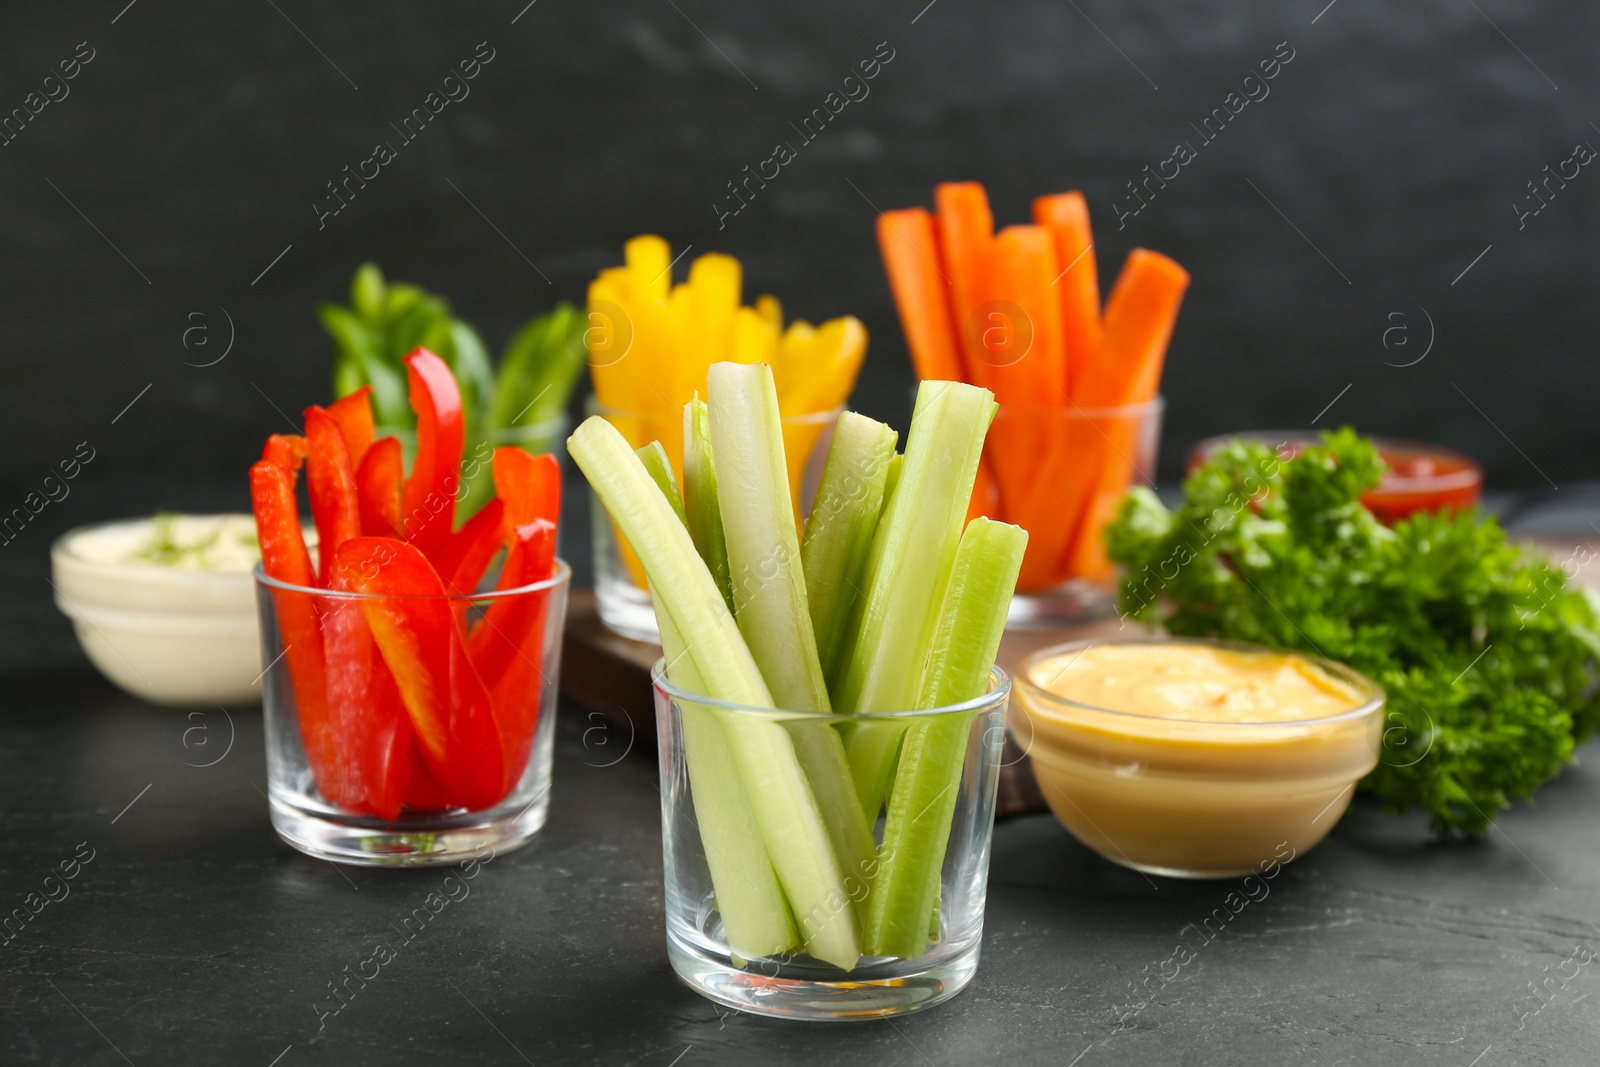 Photo of Celery and other vegetable sticks in glass bowls with dip sauce on black table